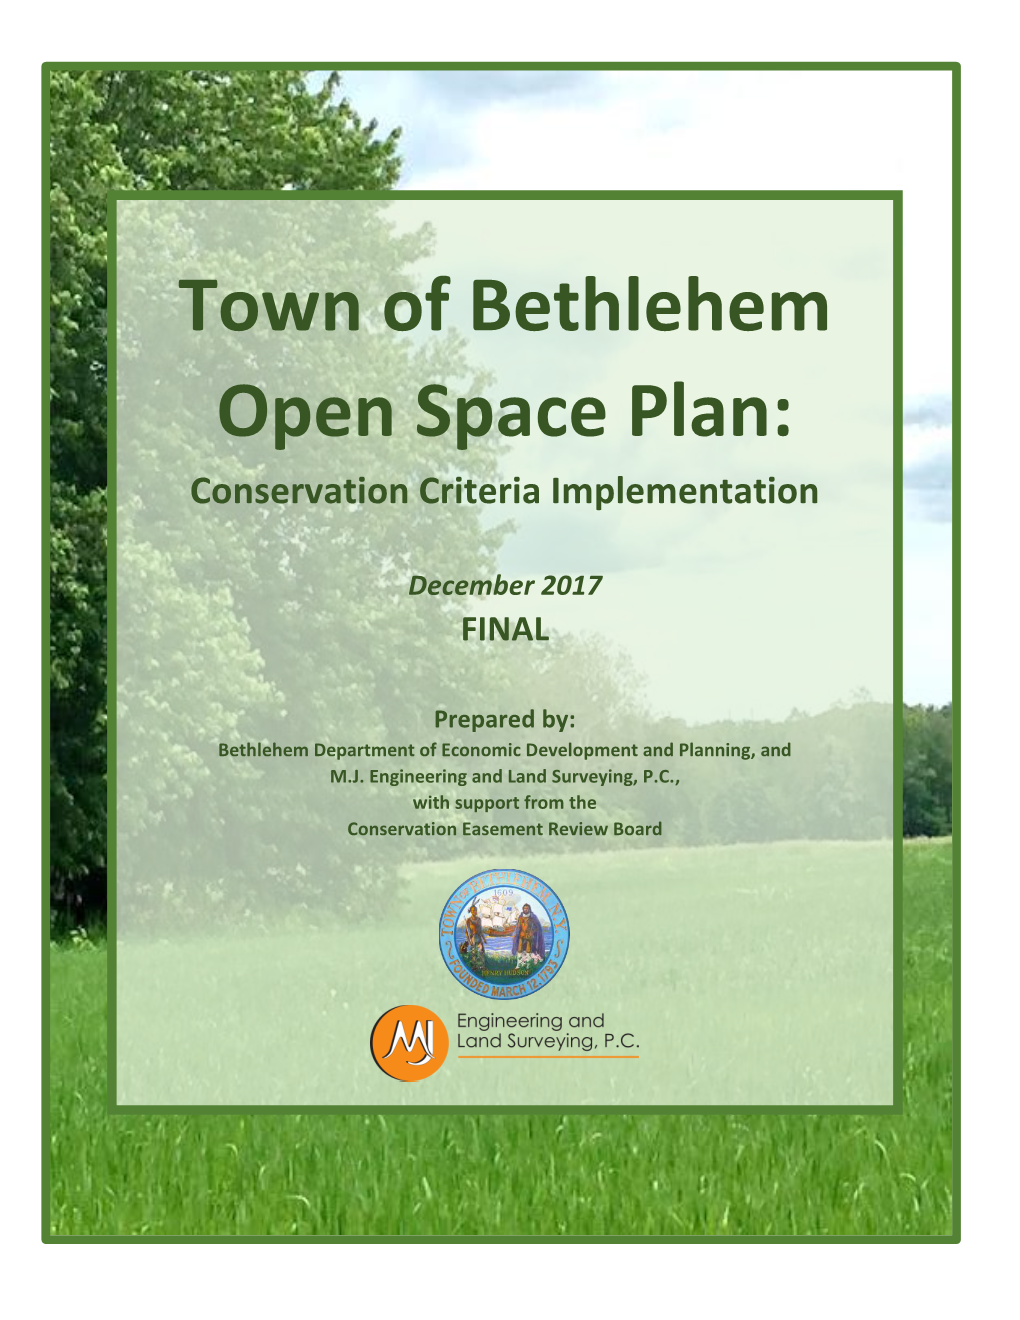 Town of Bethlehem Open Space Plan: Conservation Criteria Implementation